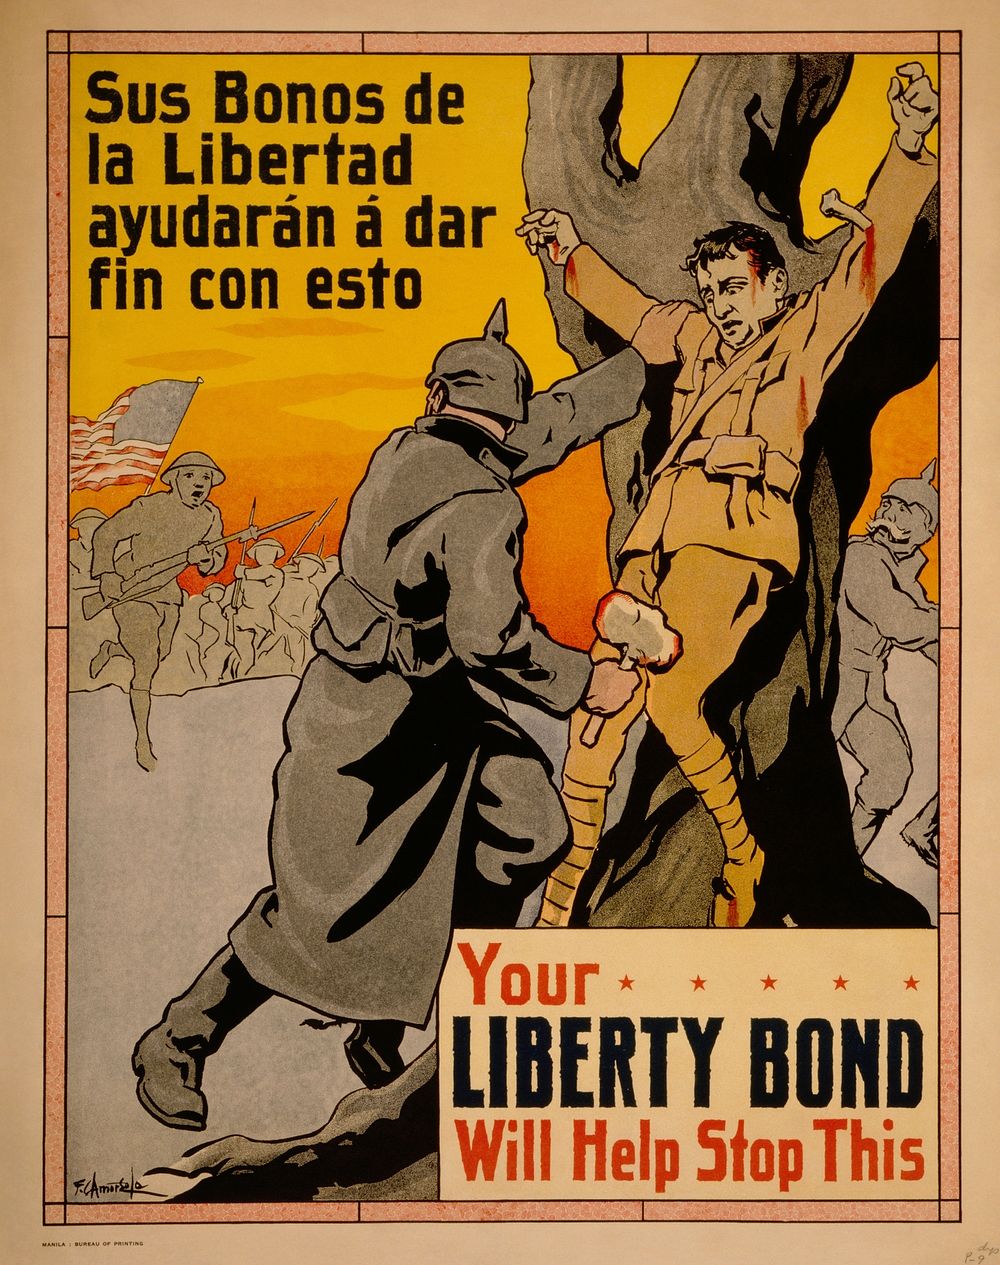 Poster showing German soldiers nailing a man to a tree, as American soldiers come to his rescue. "Your Liberty Bond will…